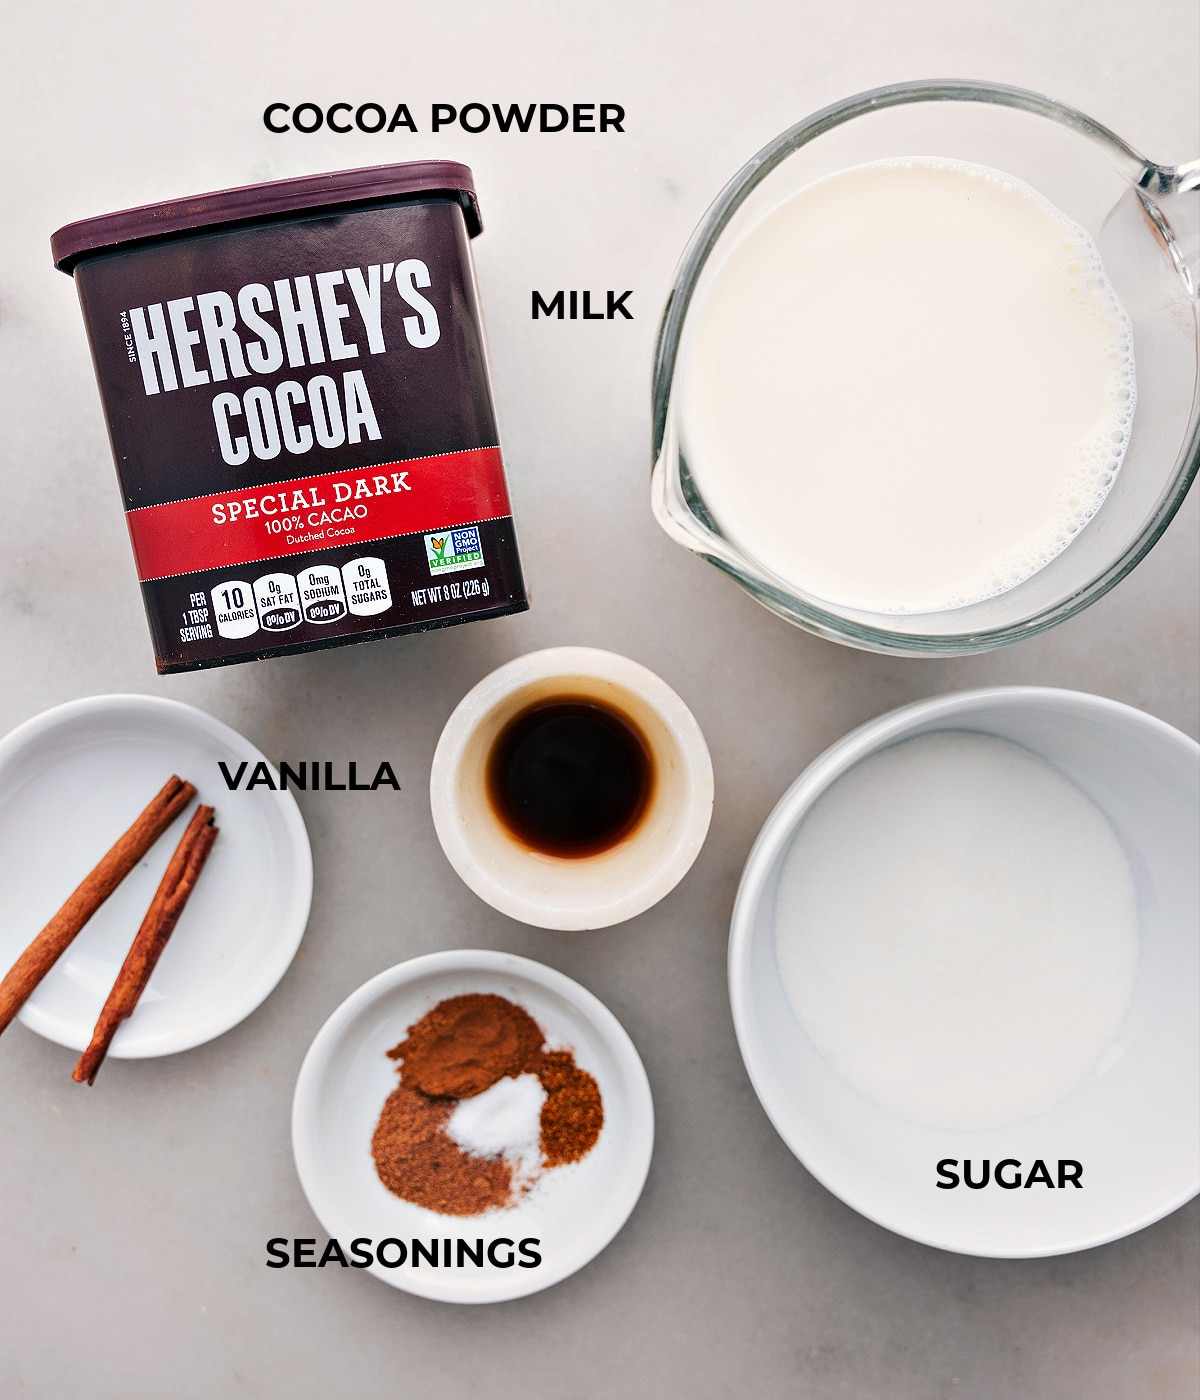 Arrangement of ingredients including milk, rich cocoa powder, and additional elements for the Mexican Hot Chocolate recipe.